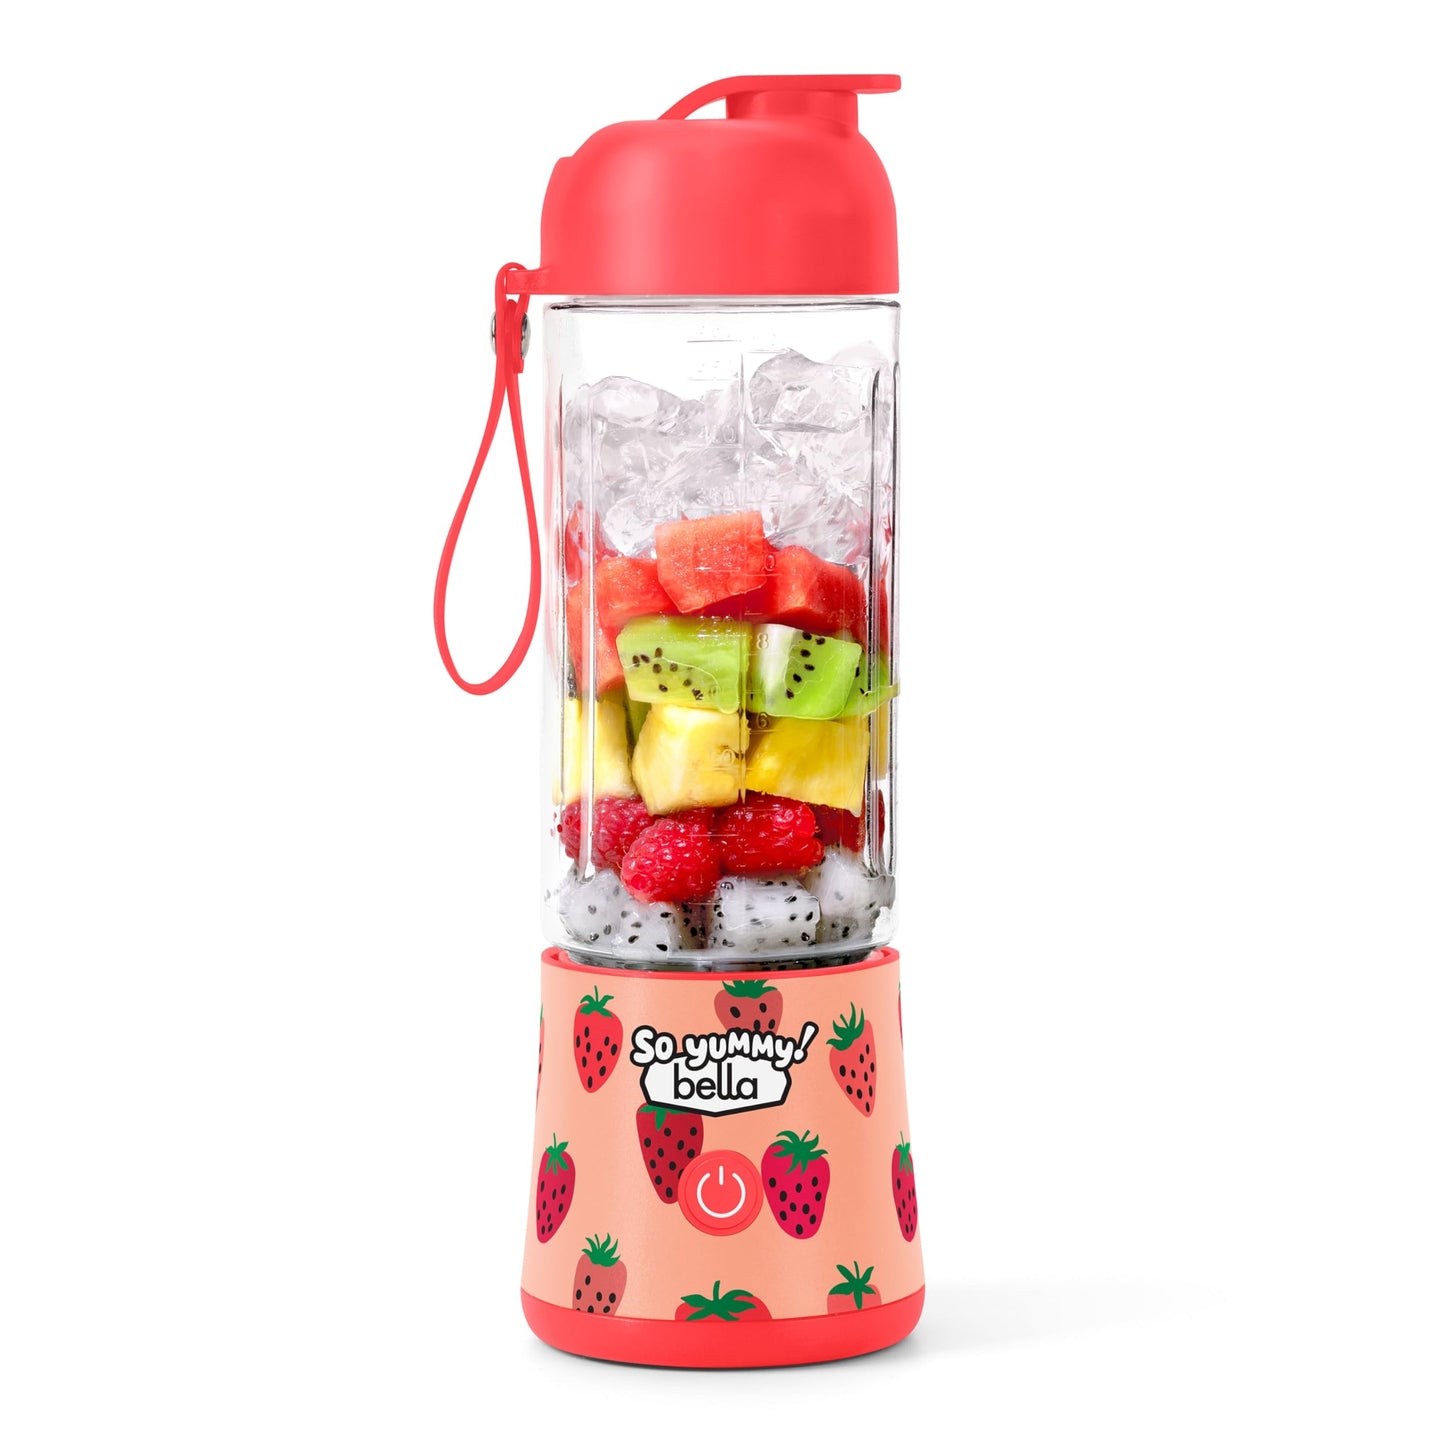 So Yummy by bella Portable To Go Blender